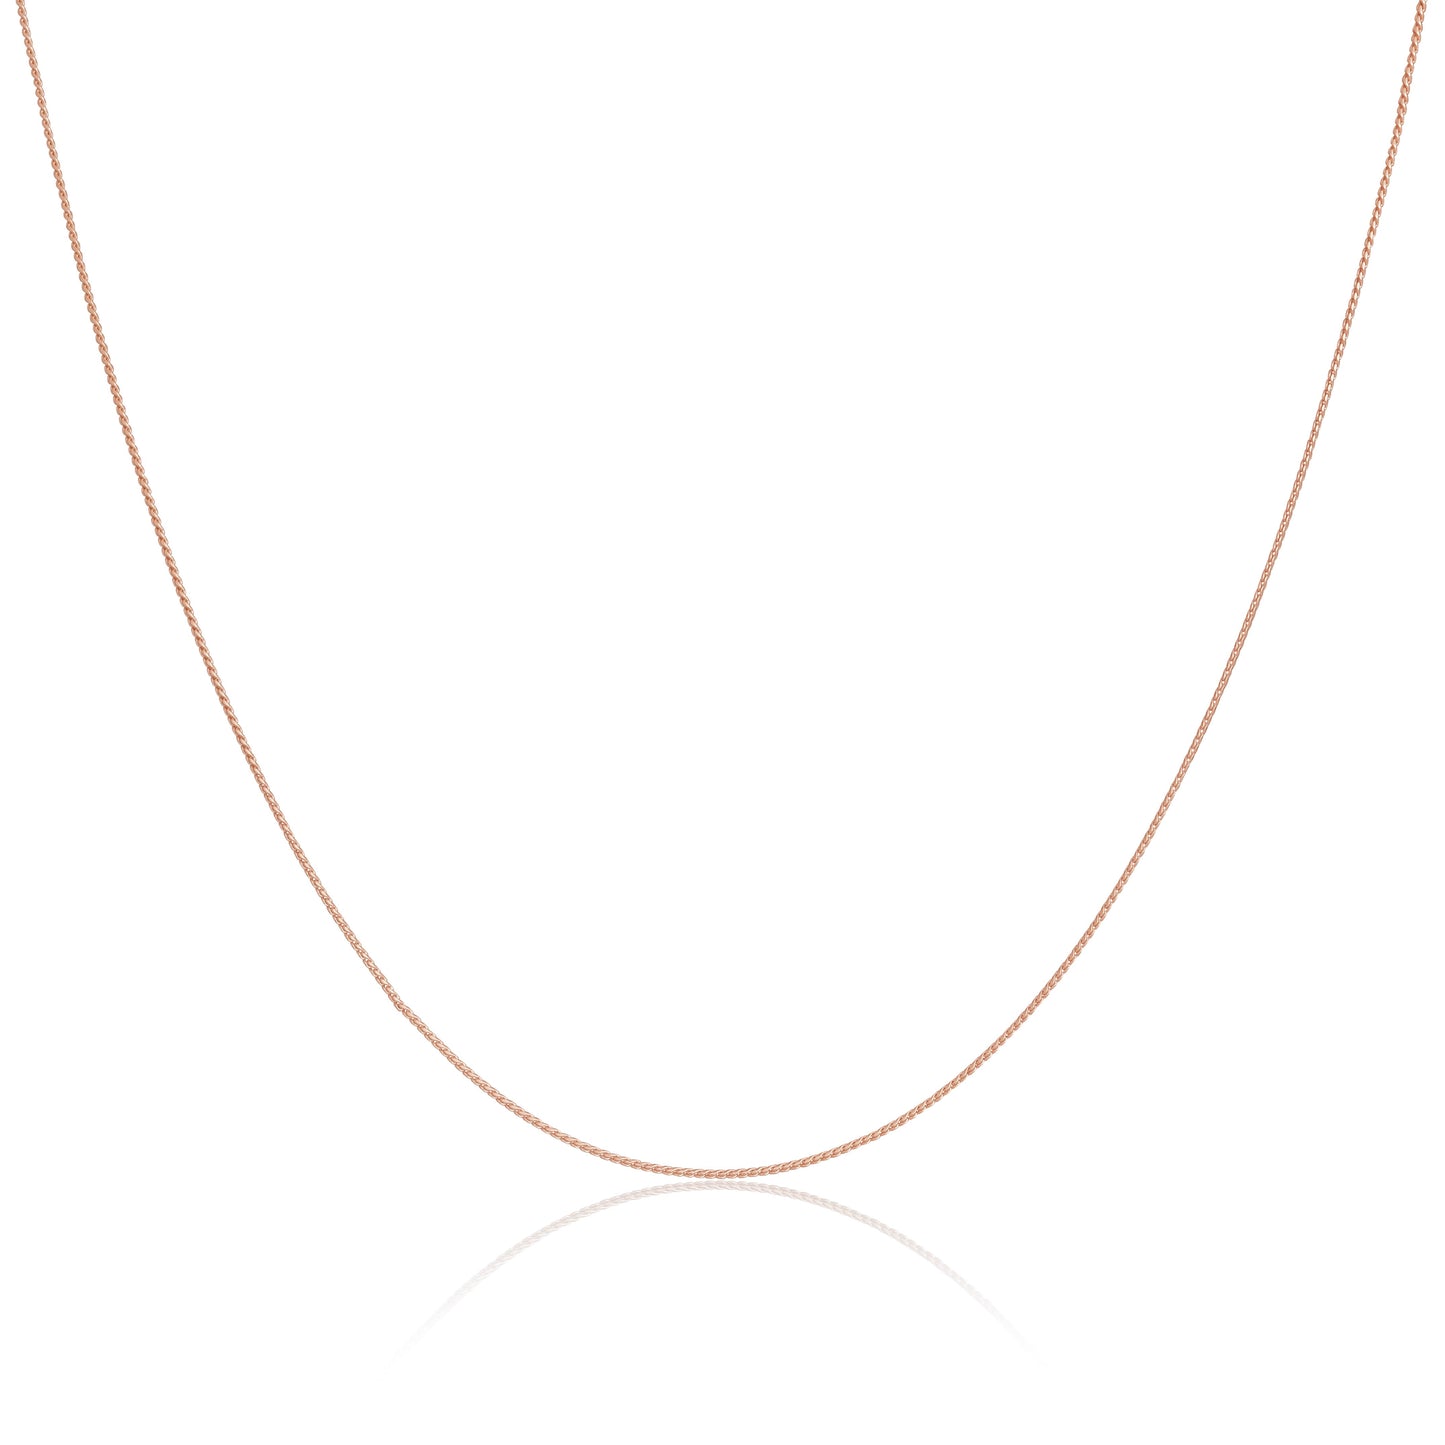 Rose Gold Plated Sterling Silver 14 - 28 Inch Foxtail Chain Necklace